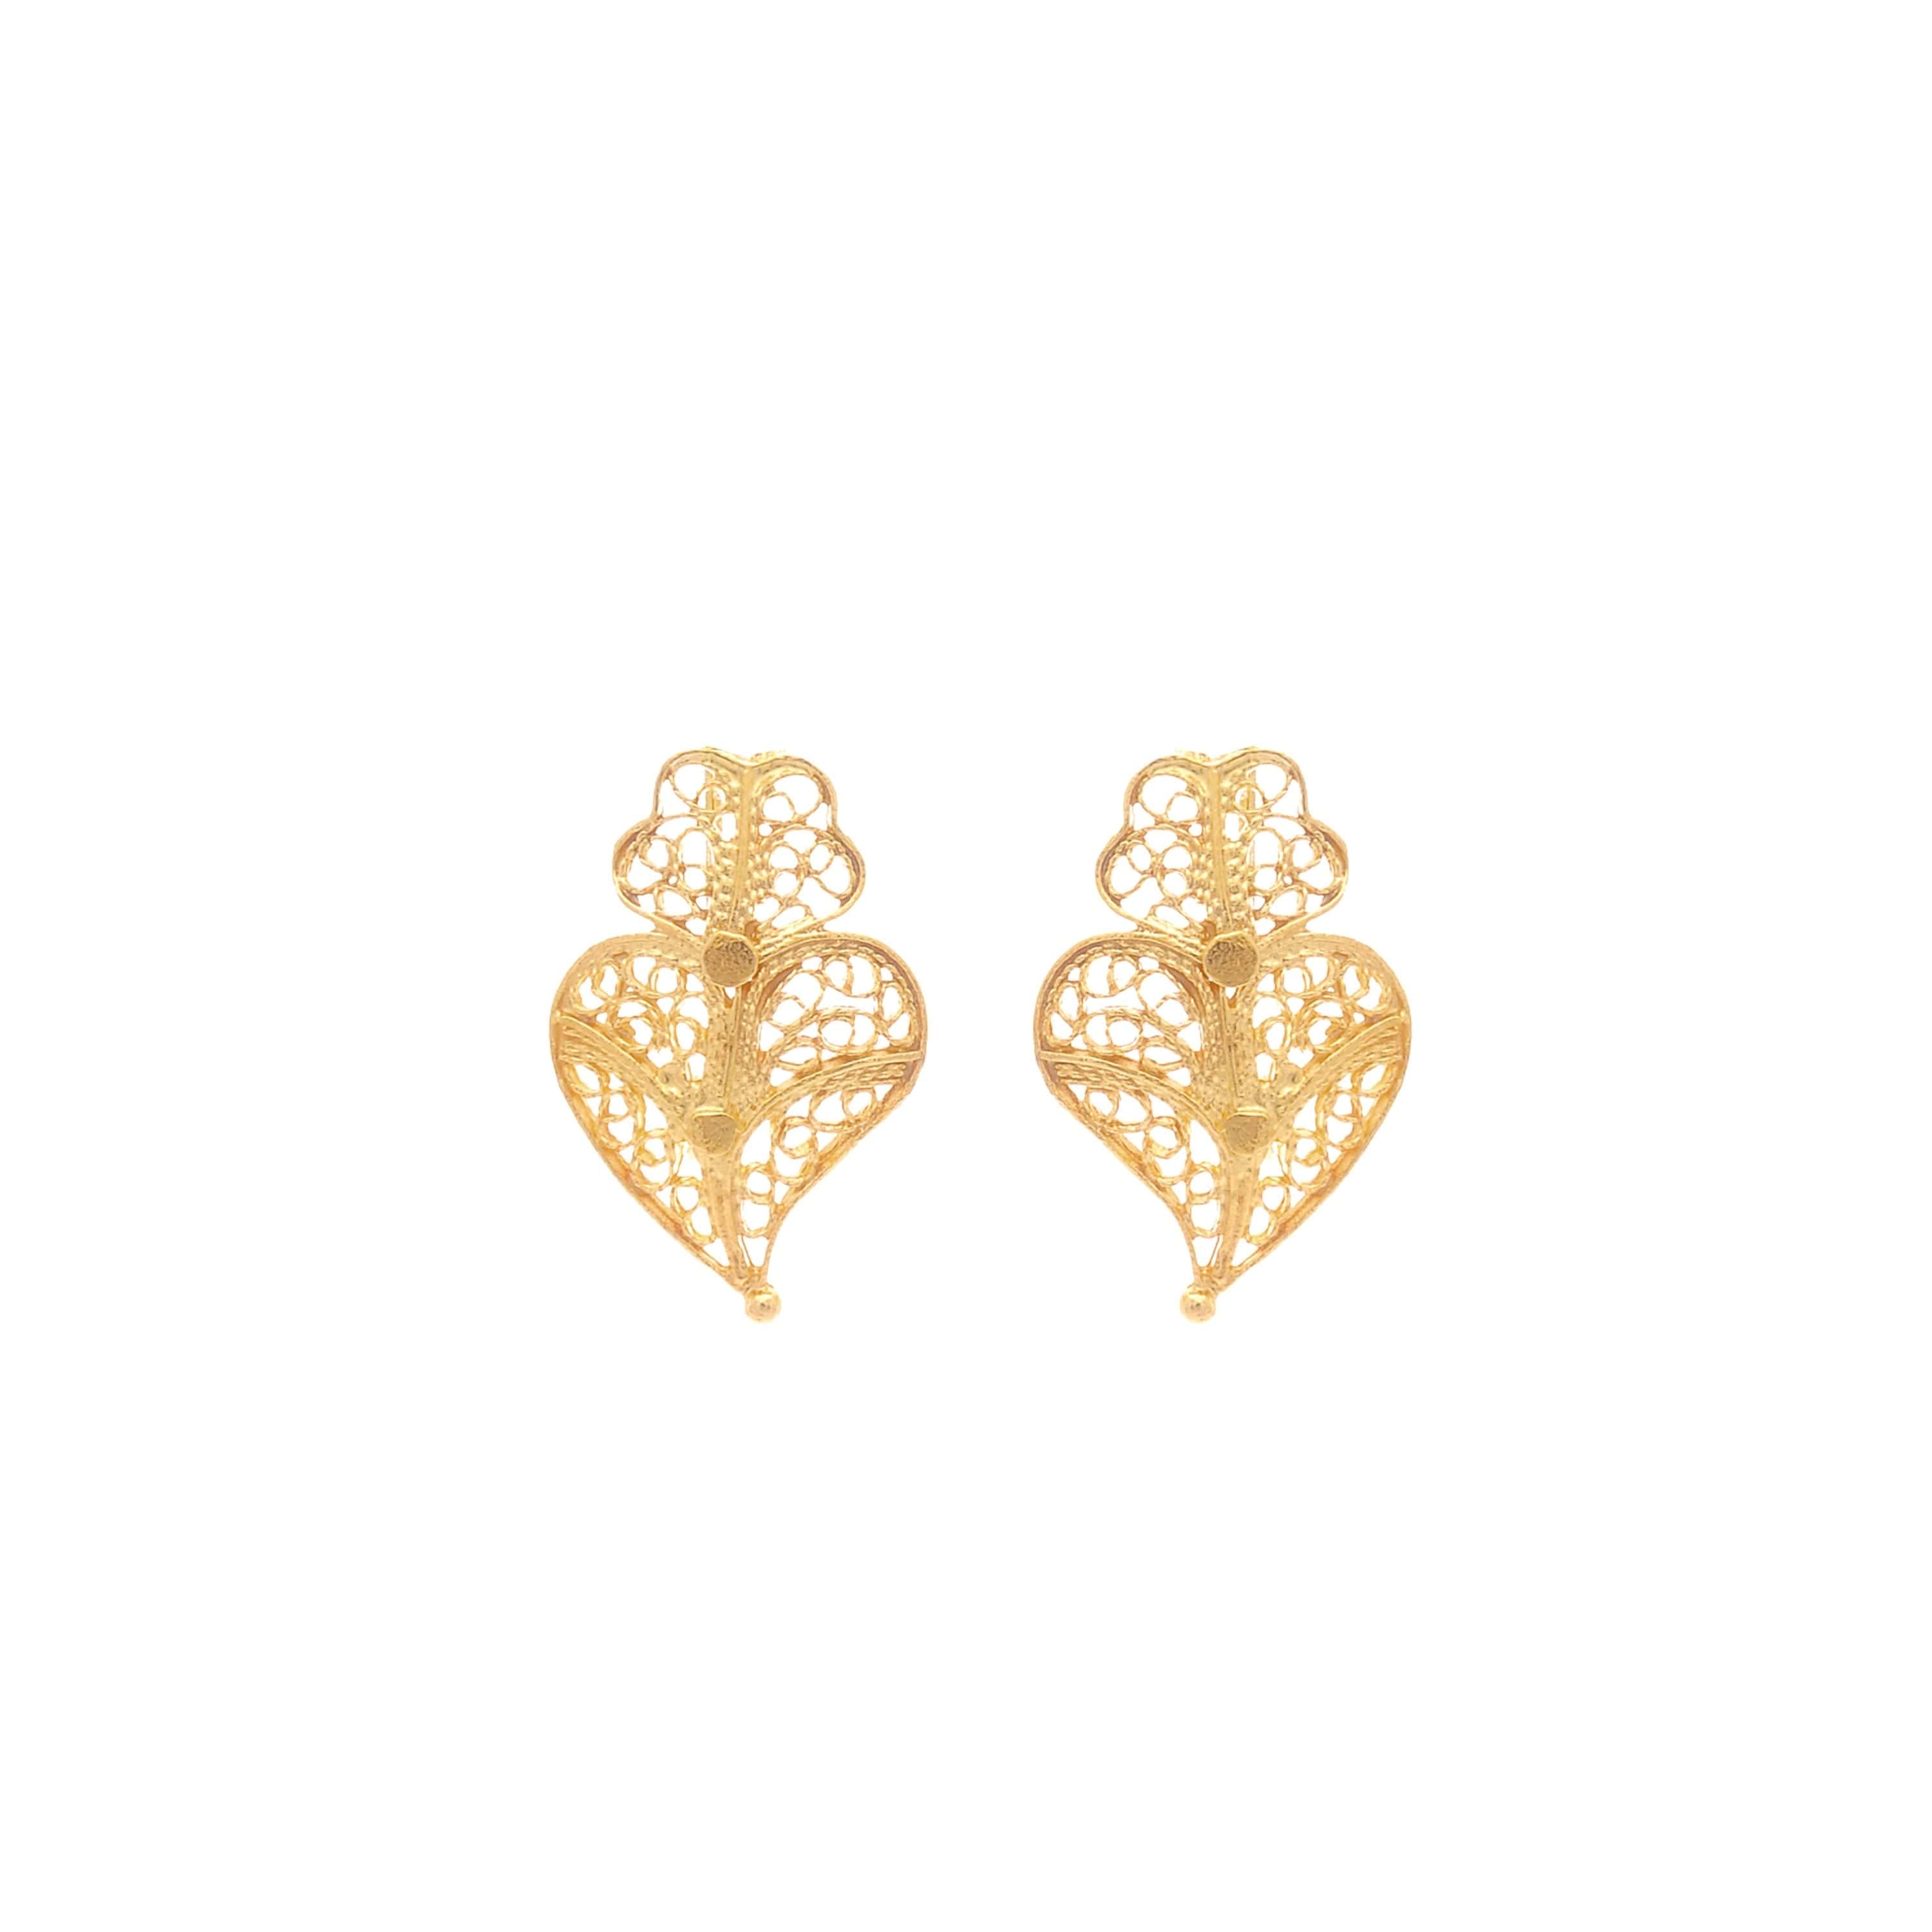 Black Friday Leaves Earrings in Gold Plated Silver